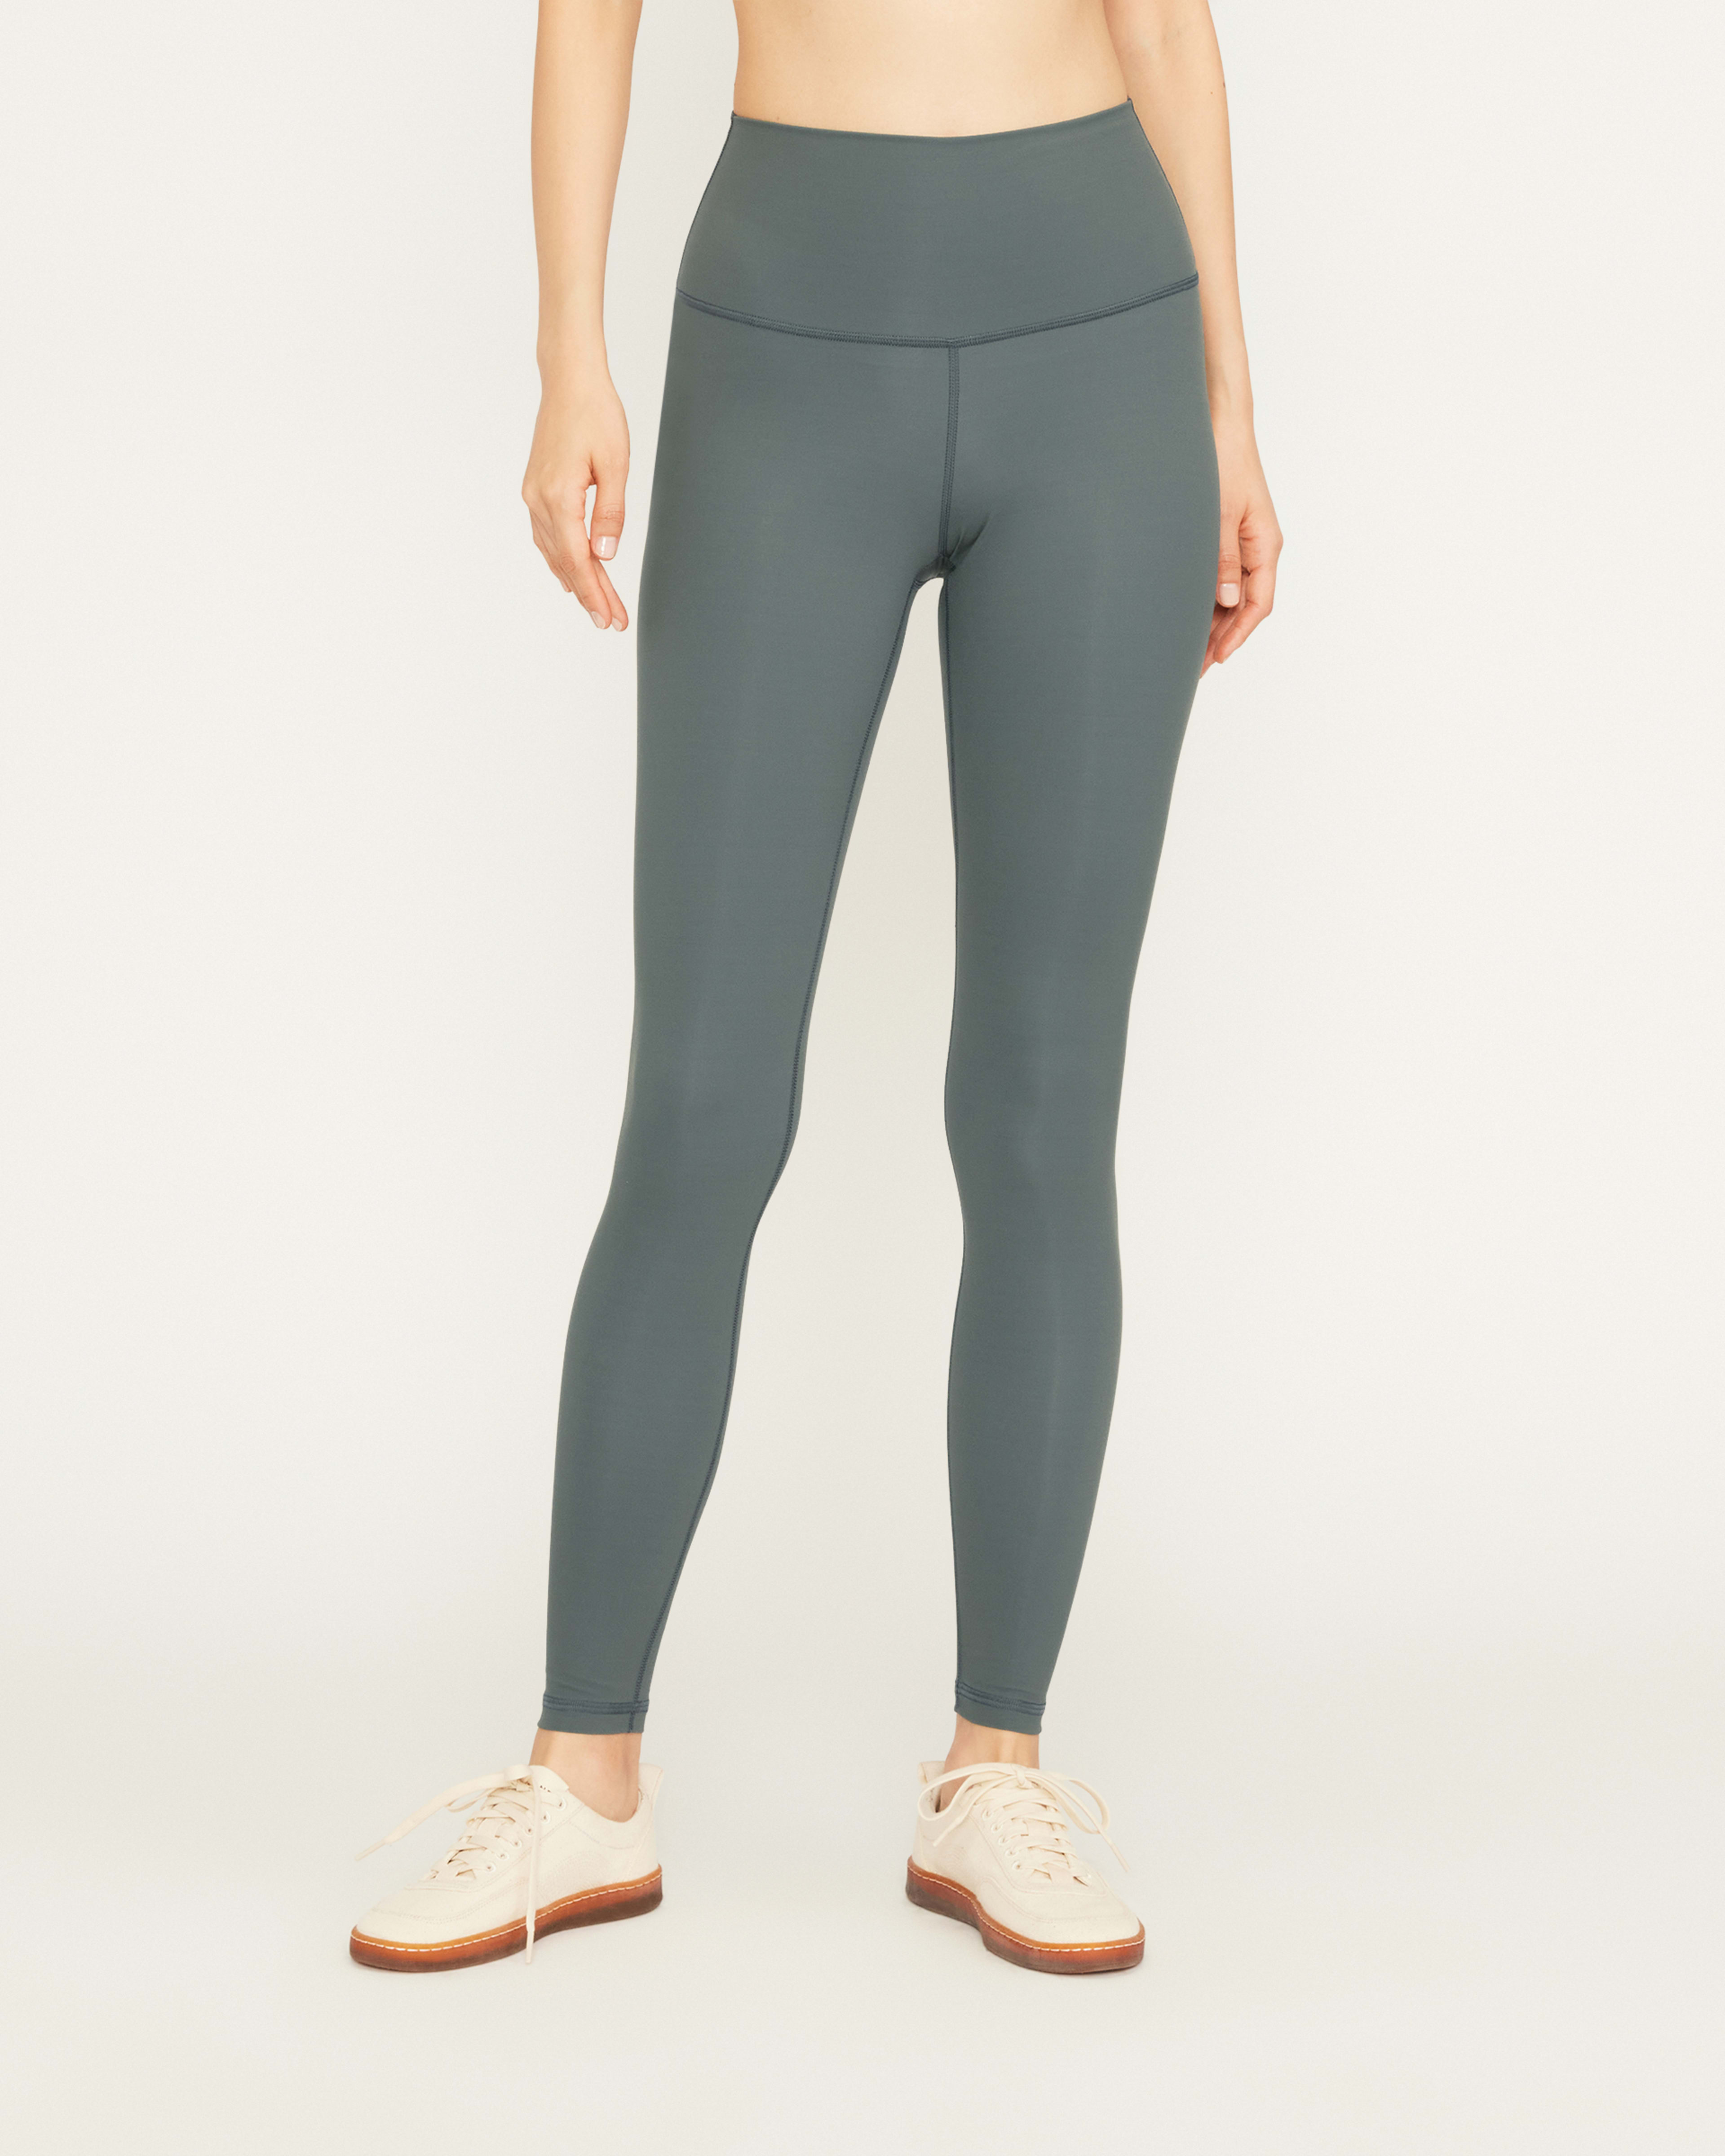 Xersion Women's Leggings On Sale Up To 90% Off Retail